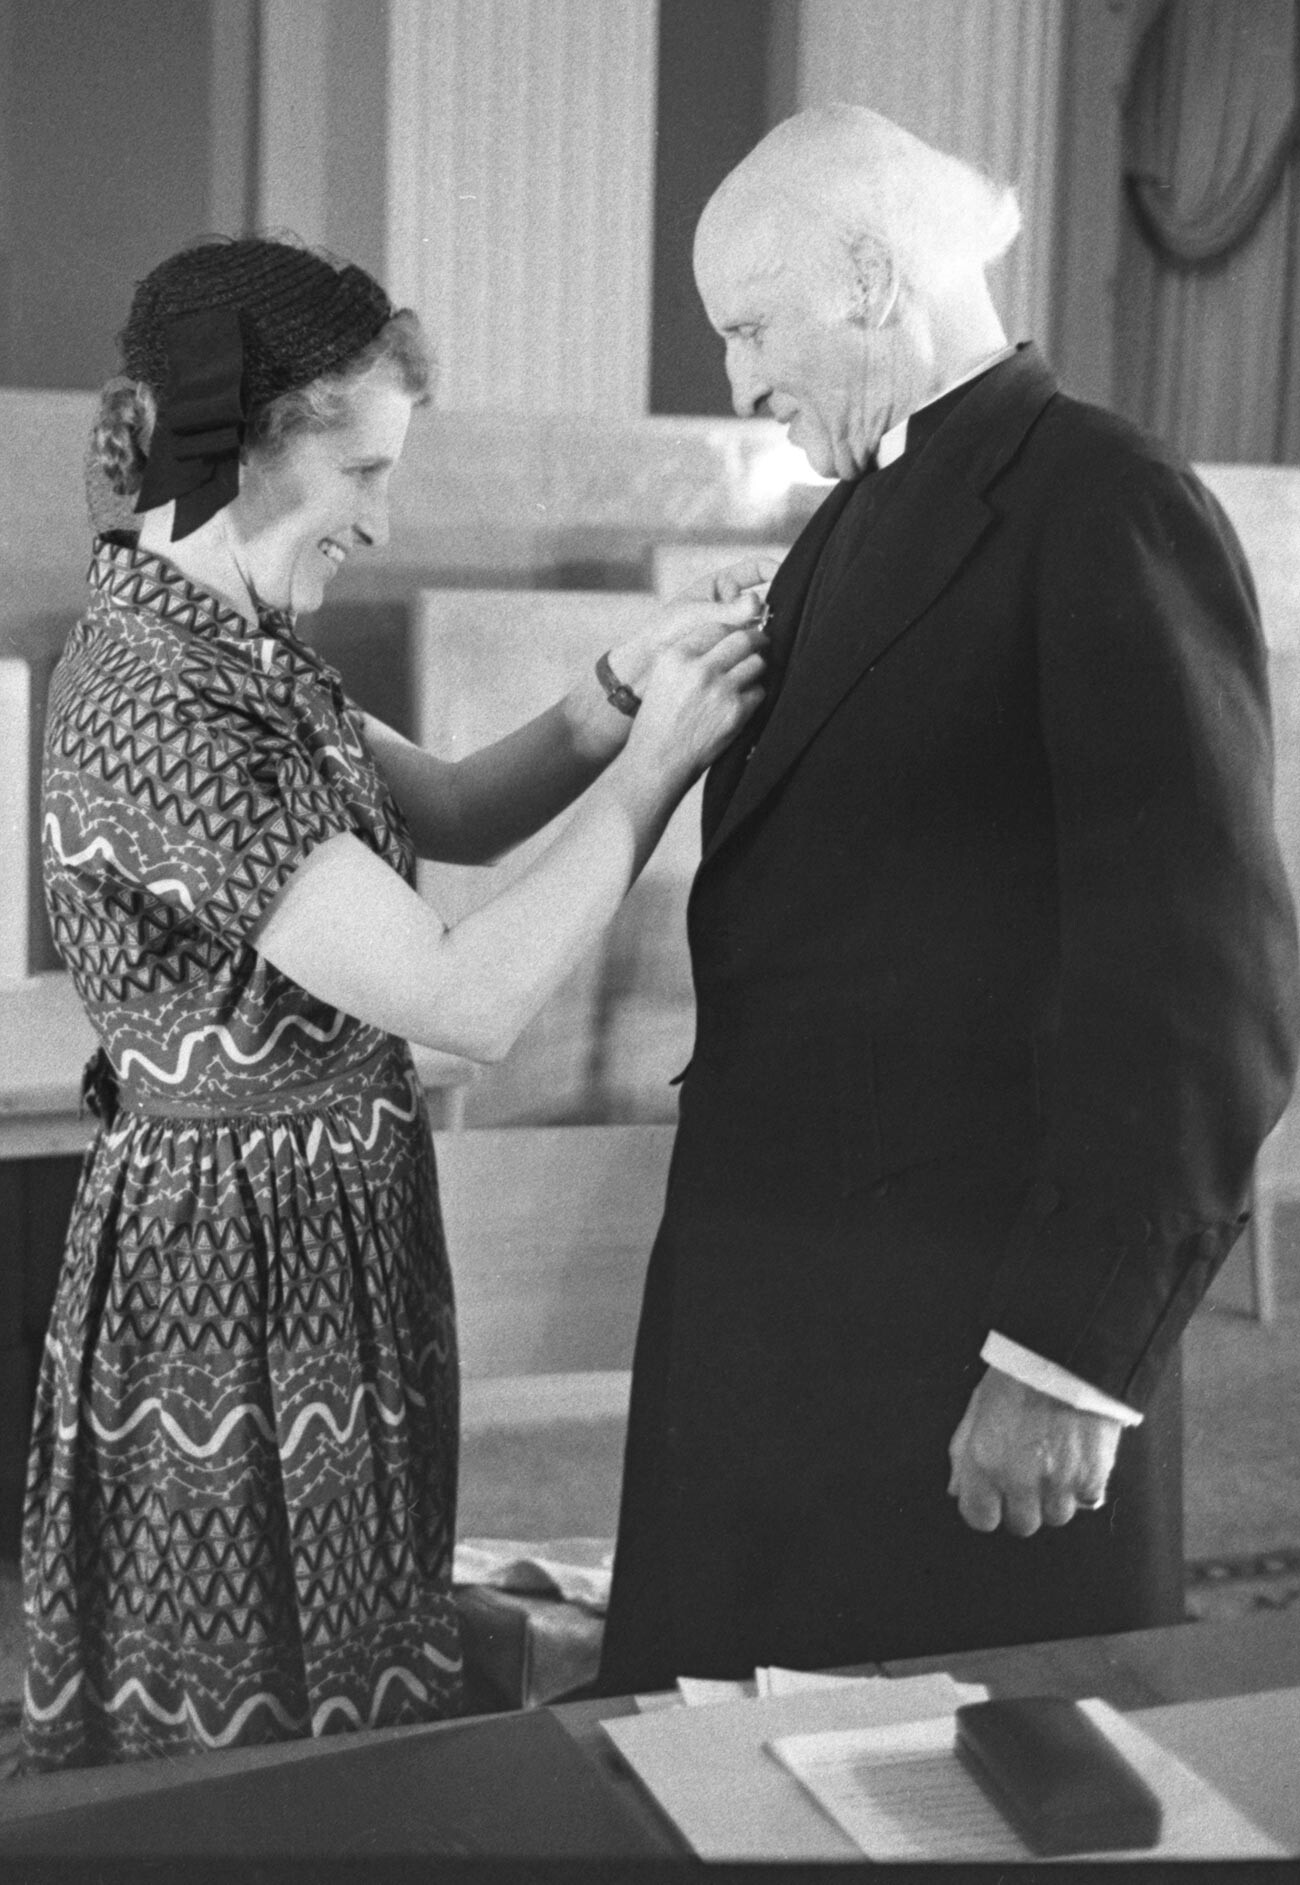 Nowell Johnson presents the medal of the Stalin Peace Prize laureate to her husband, Dean of Canterbury Hewlett Johnson.